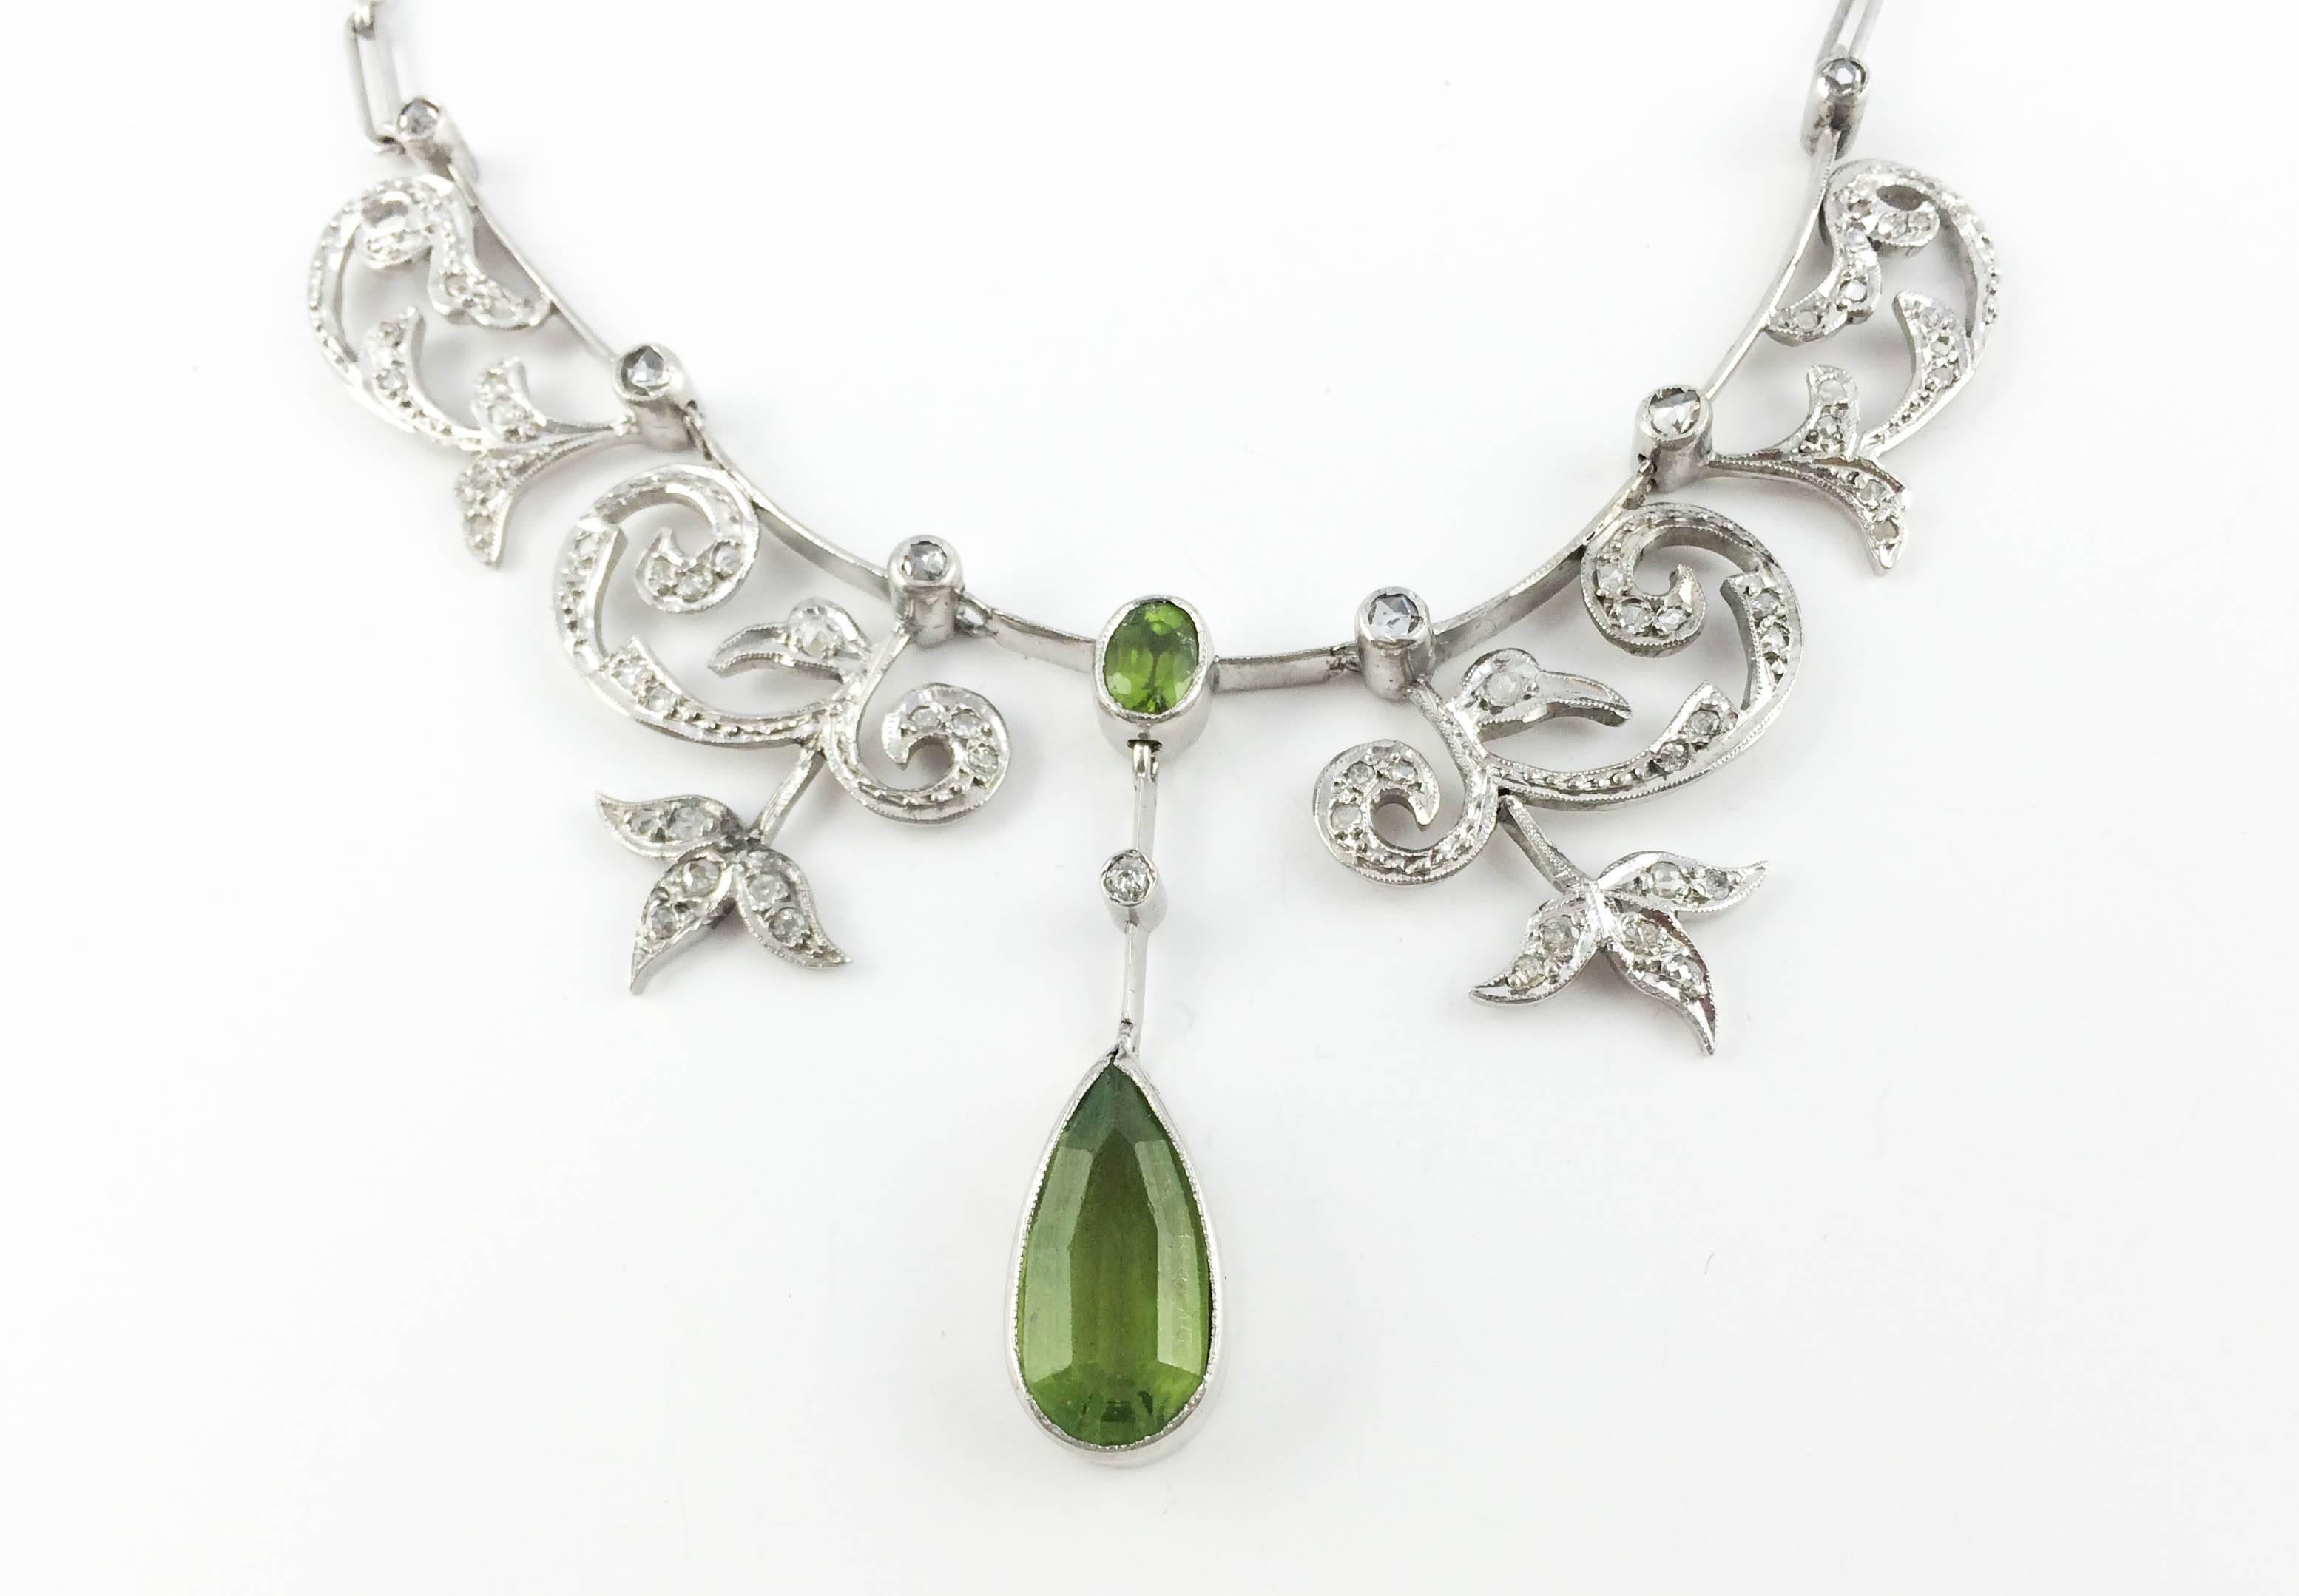 White Gold, Diamonds and Peridot Necklace - 1920s In Excellent Condition In London, Chelsea